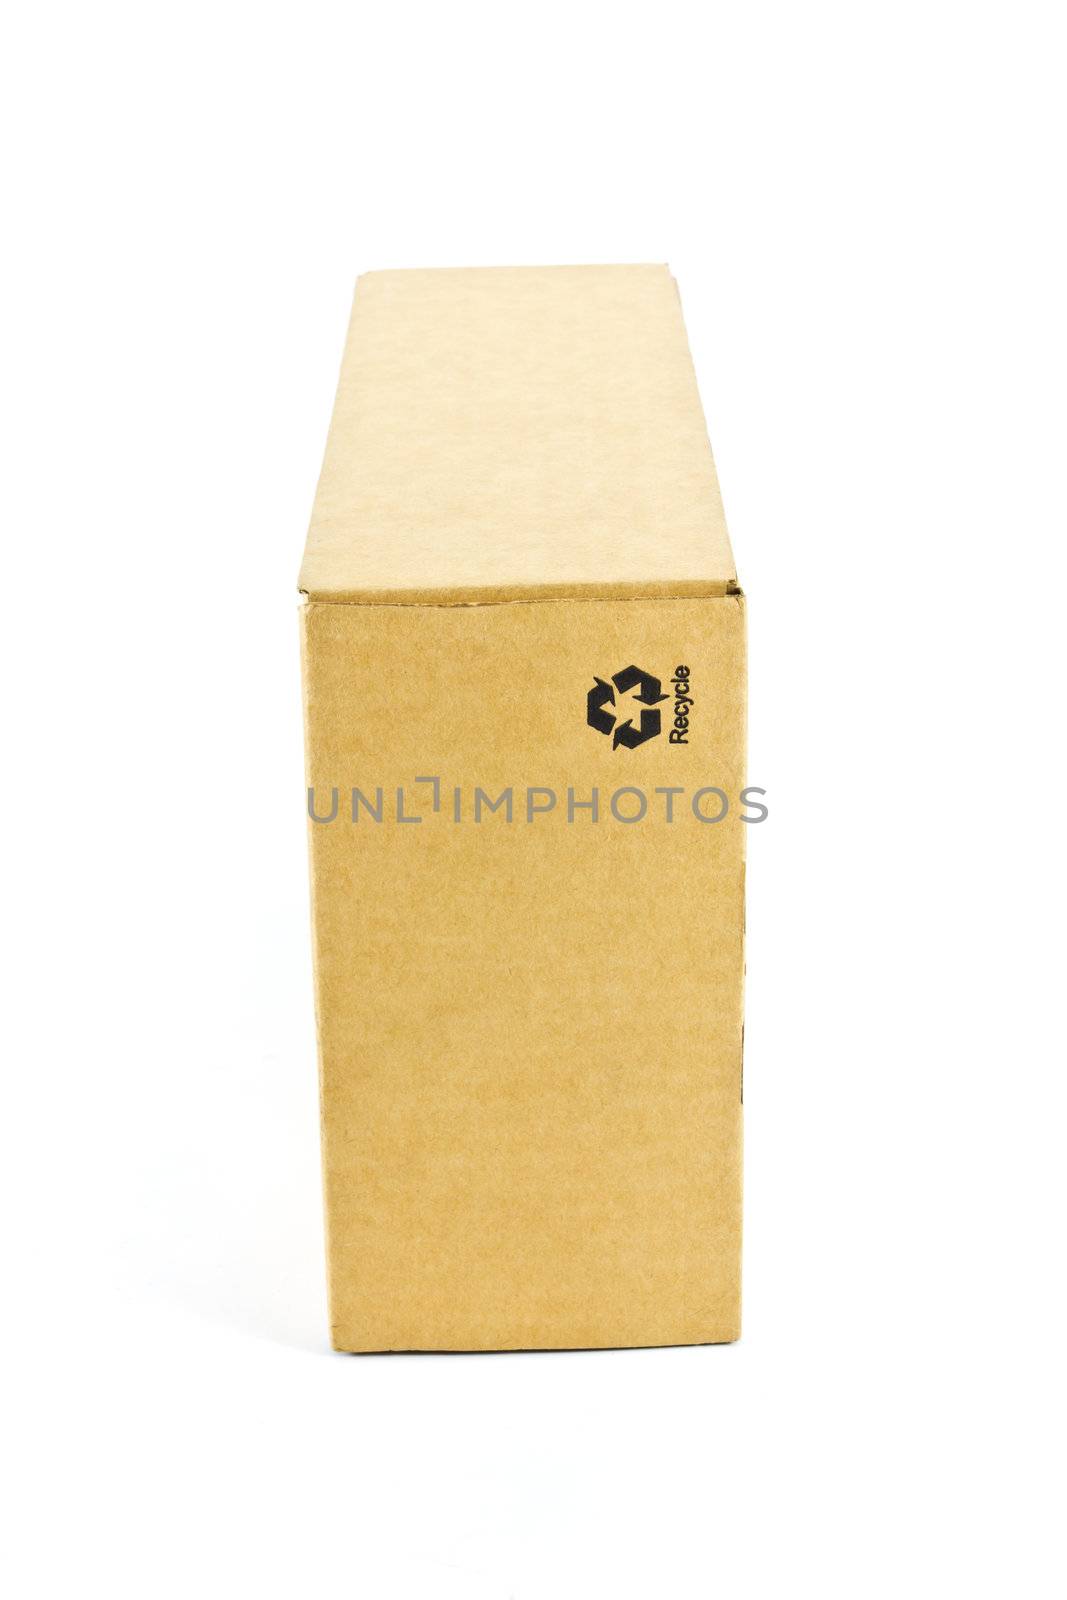 cardboard box on white background  by tungphoto